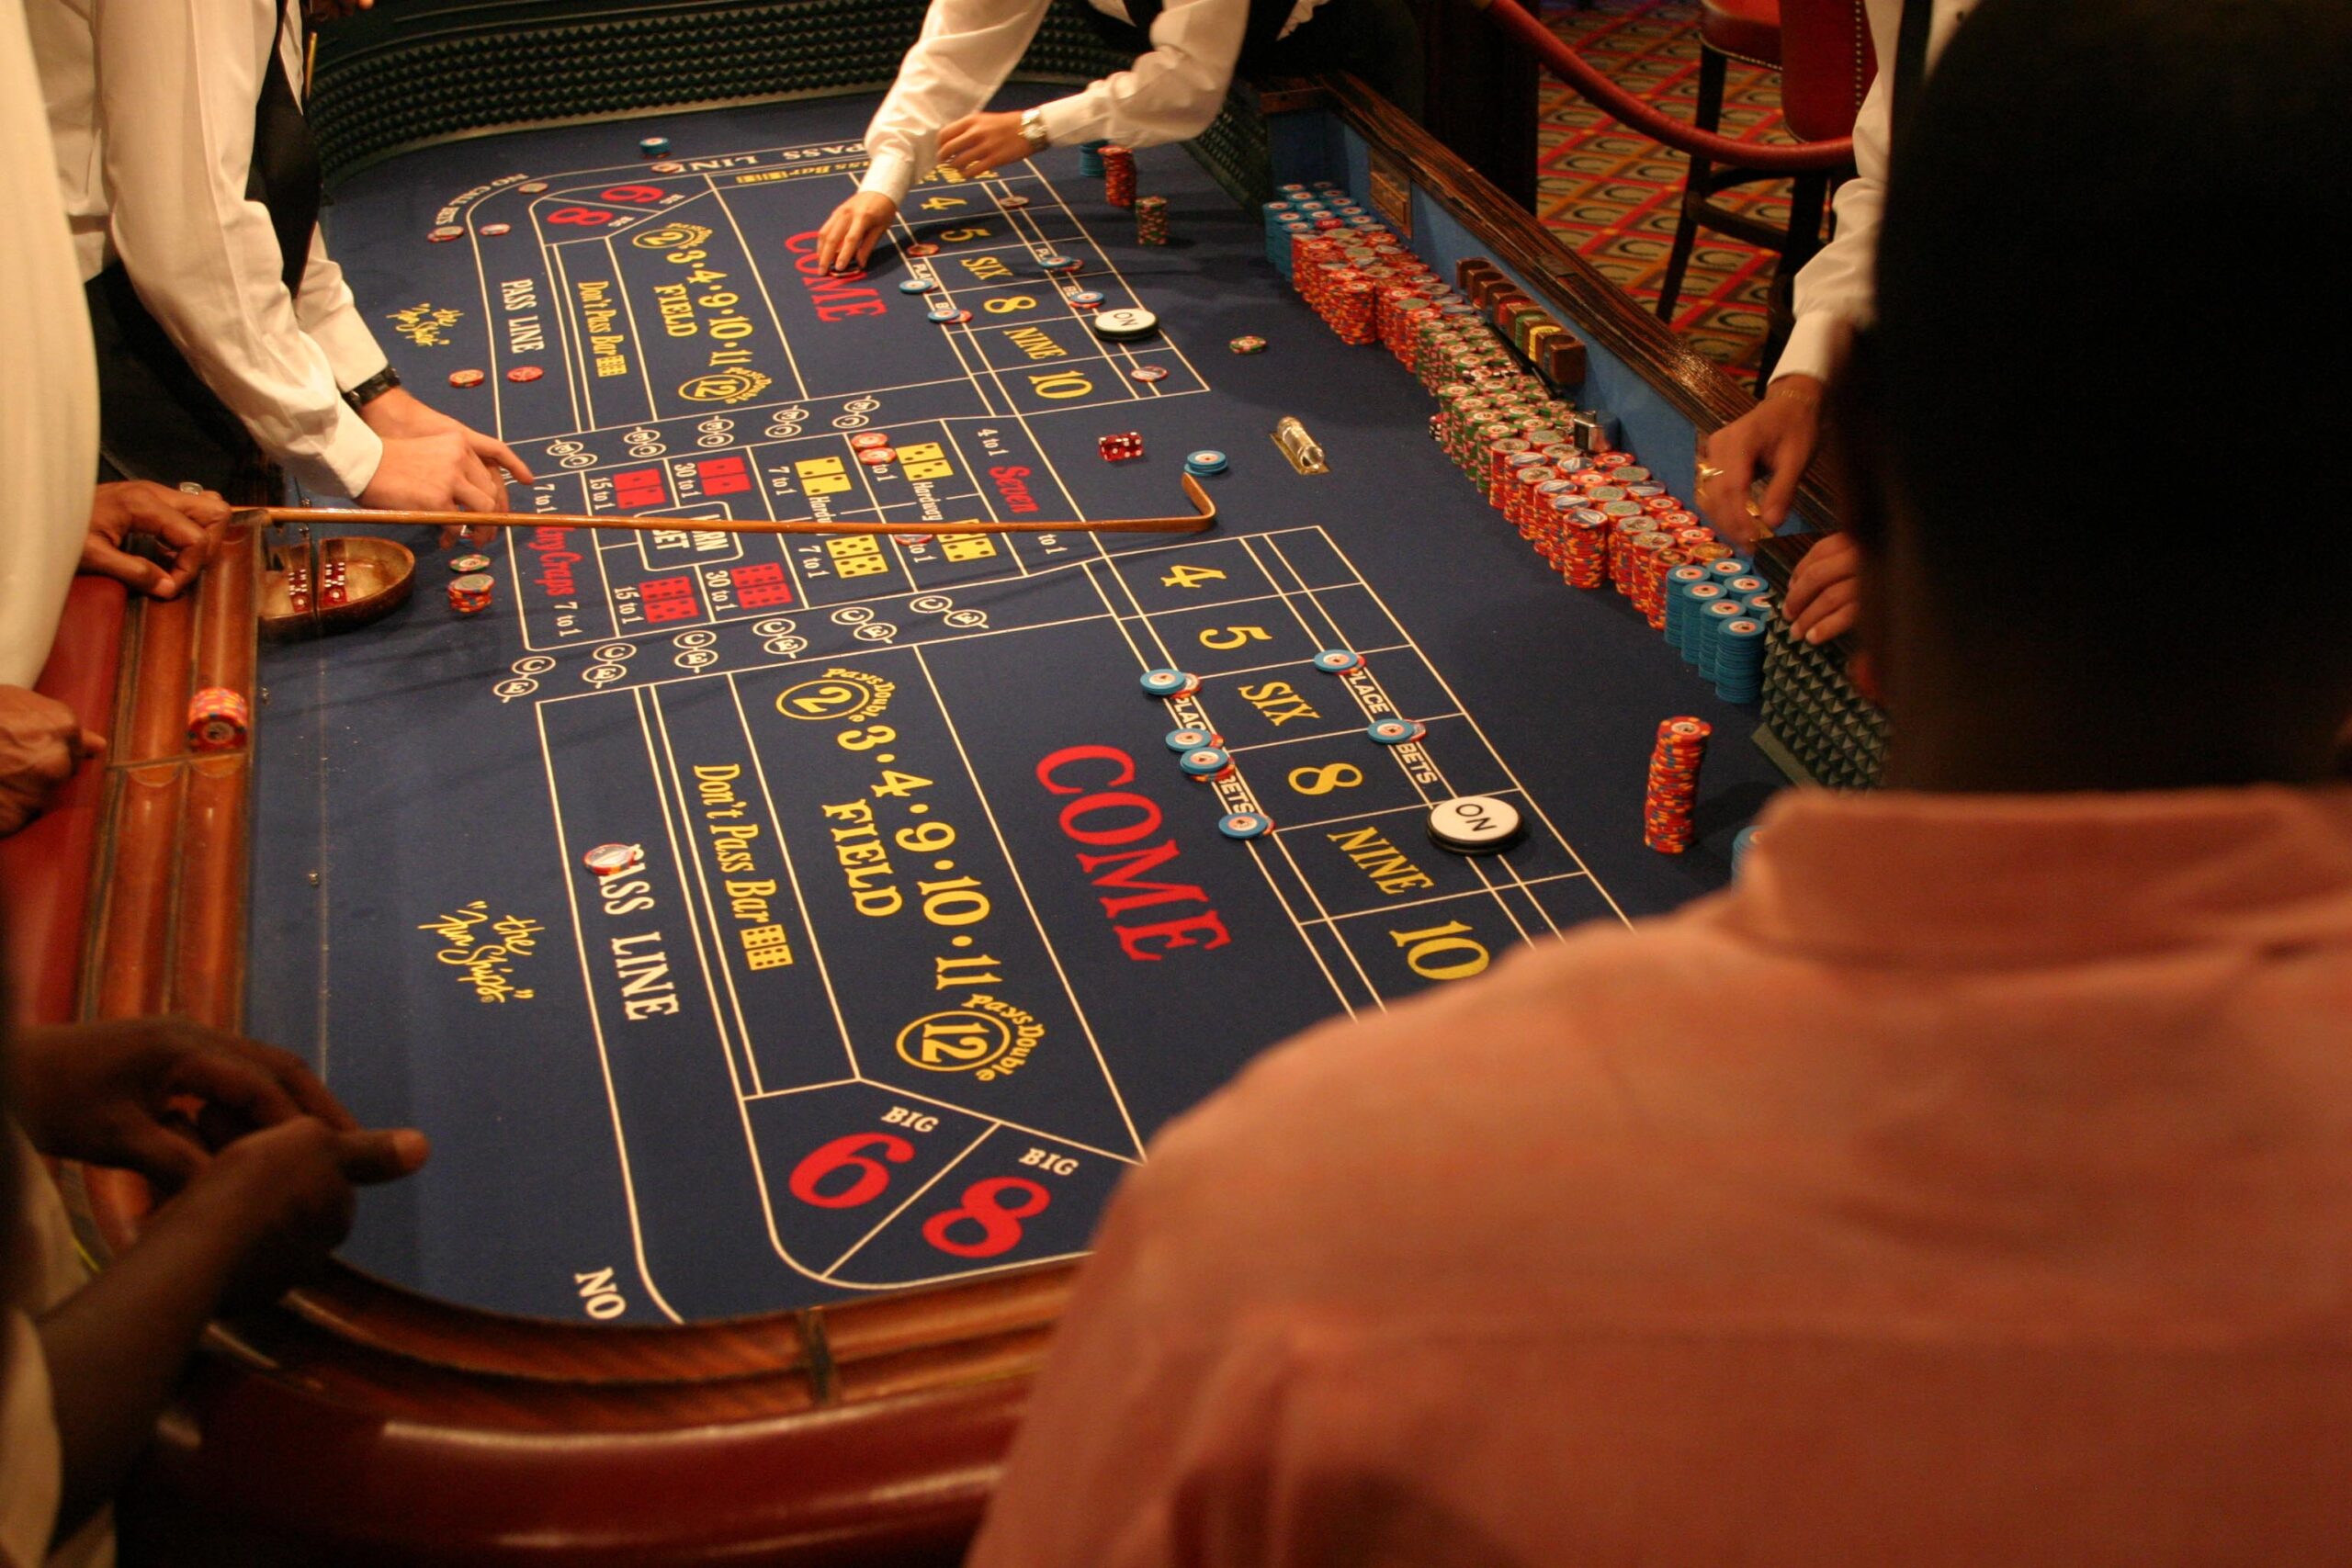 How To Win Friends And Influence People with casino